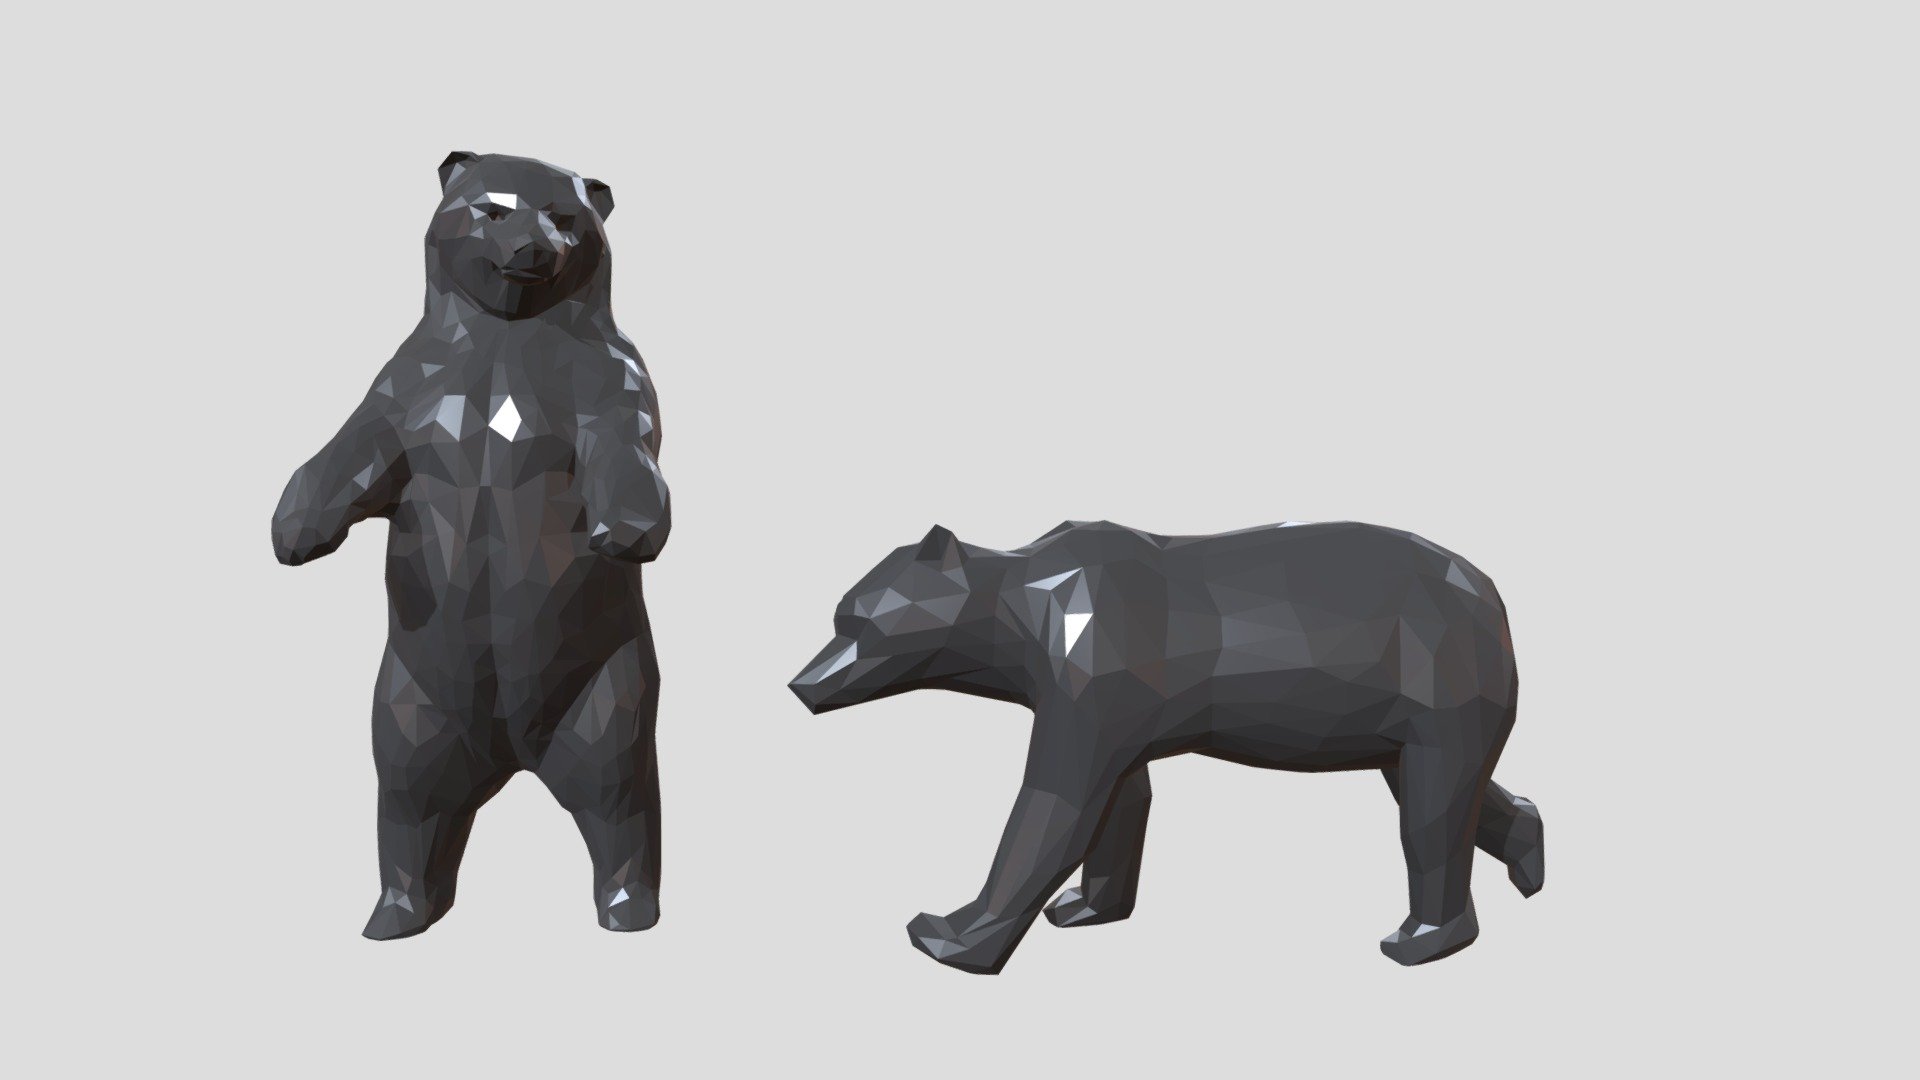 Bear LowPoly High Poly, sculpted in ZBrush 2020. Maybe used for Jewelry design, interiour design, digital visualisation, for the production of illustrations. Default size - 20 cm tall (you can scale it up or down). Ideal for printing 3D

3D Printing

Compositions

Decoration

Motion graphics - Destruction of solids

Etc....

Does not contain UVs Maps

Piece with 20 cm

Does not contain lighting

I hope it will be useful in your project !

Thank you for visiting my models !! - Bear LowPoly - Buy Royalty Free 3D model by aleexstudios 3d model